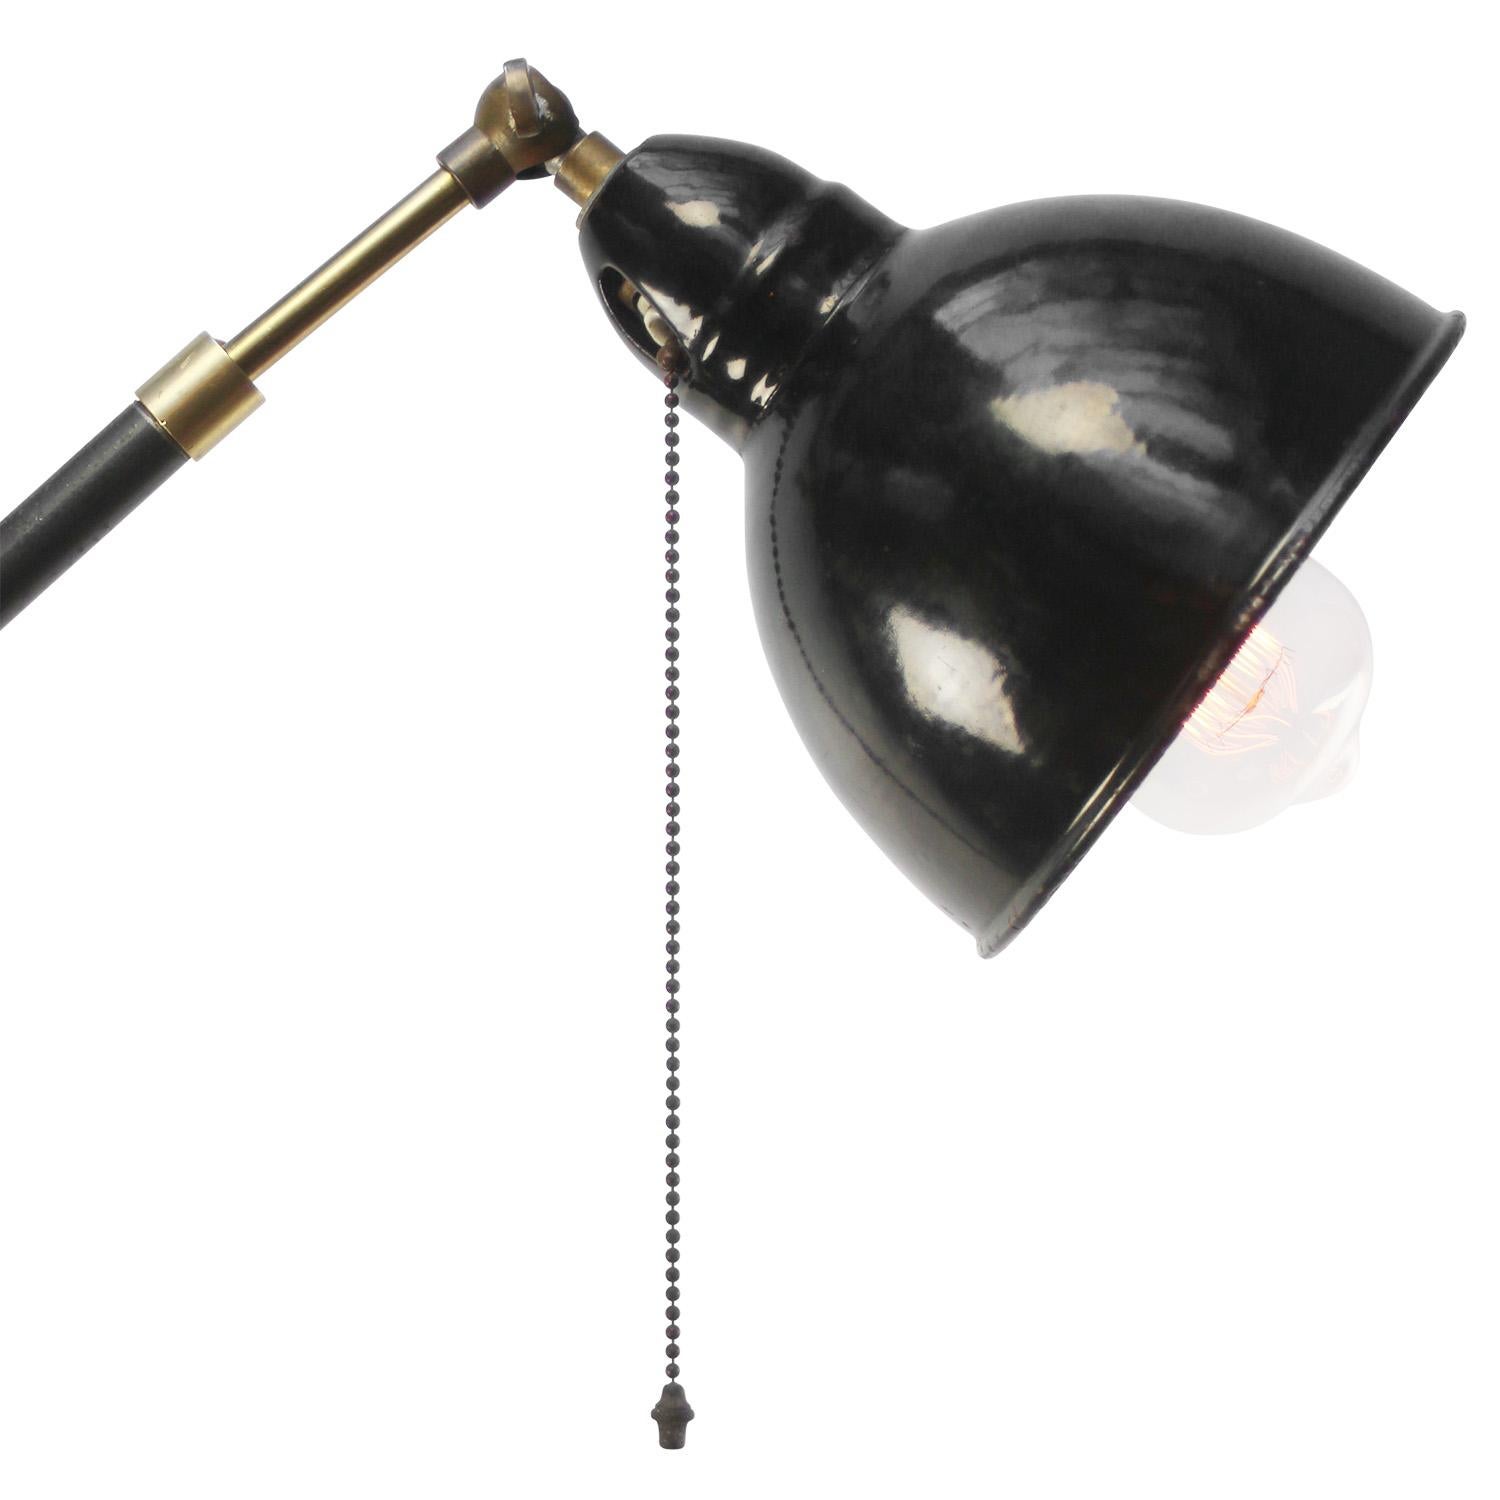 Black Enamel Vintage industrial workshop floor lamp
Pull switch in shade
Cast iron with brass joints
Adjustable in angle. 

Diameter foot 23 cm

Electric wire 2 meter / 80” with plug and floor switch

Available with UK / US plug

Priced per